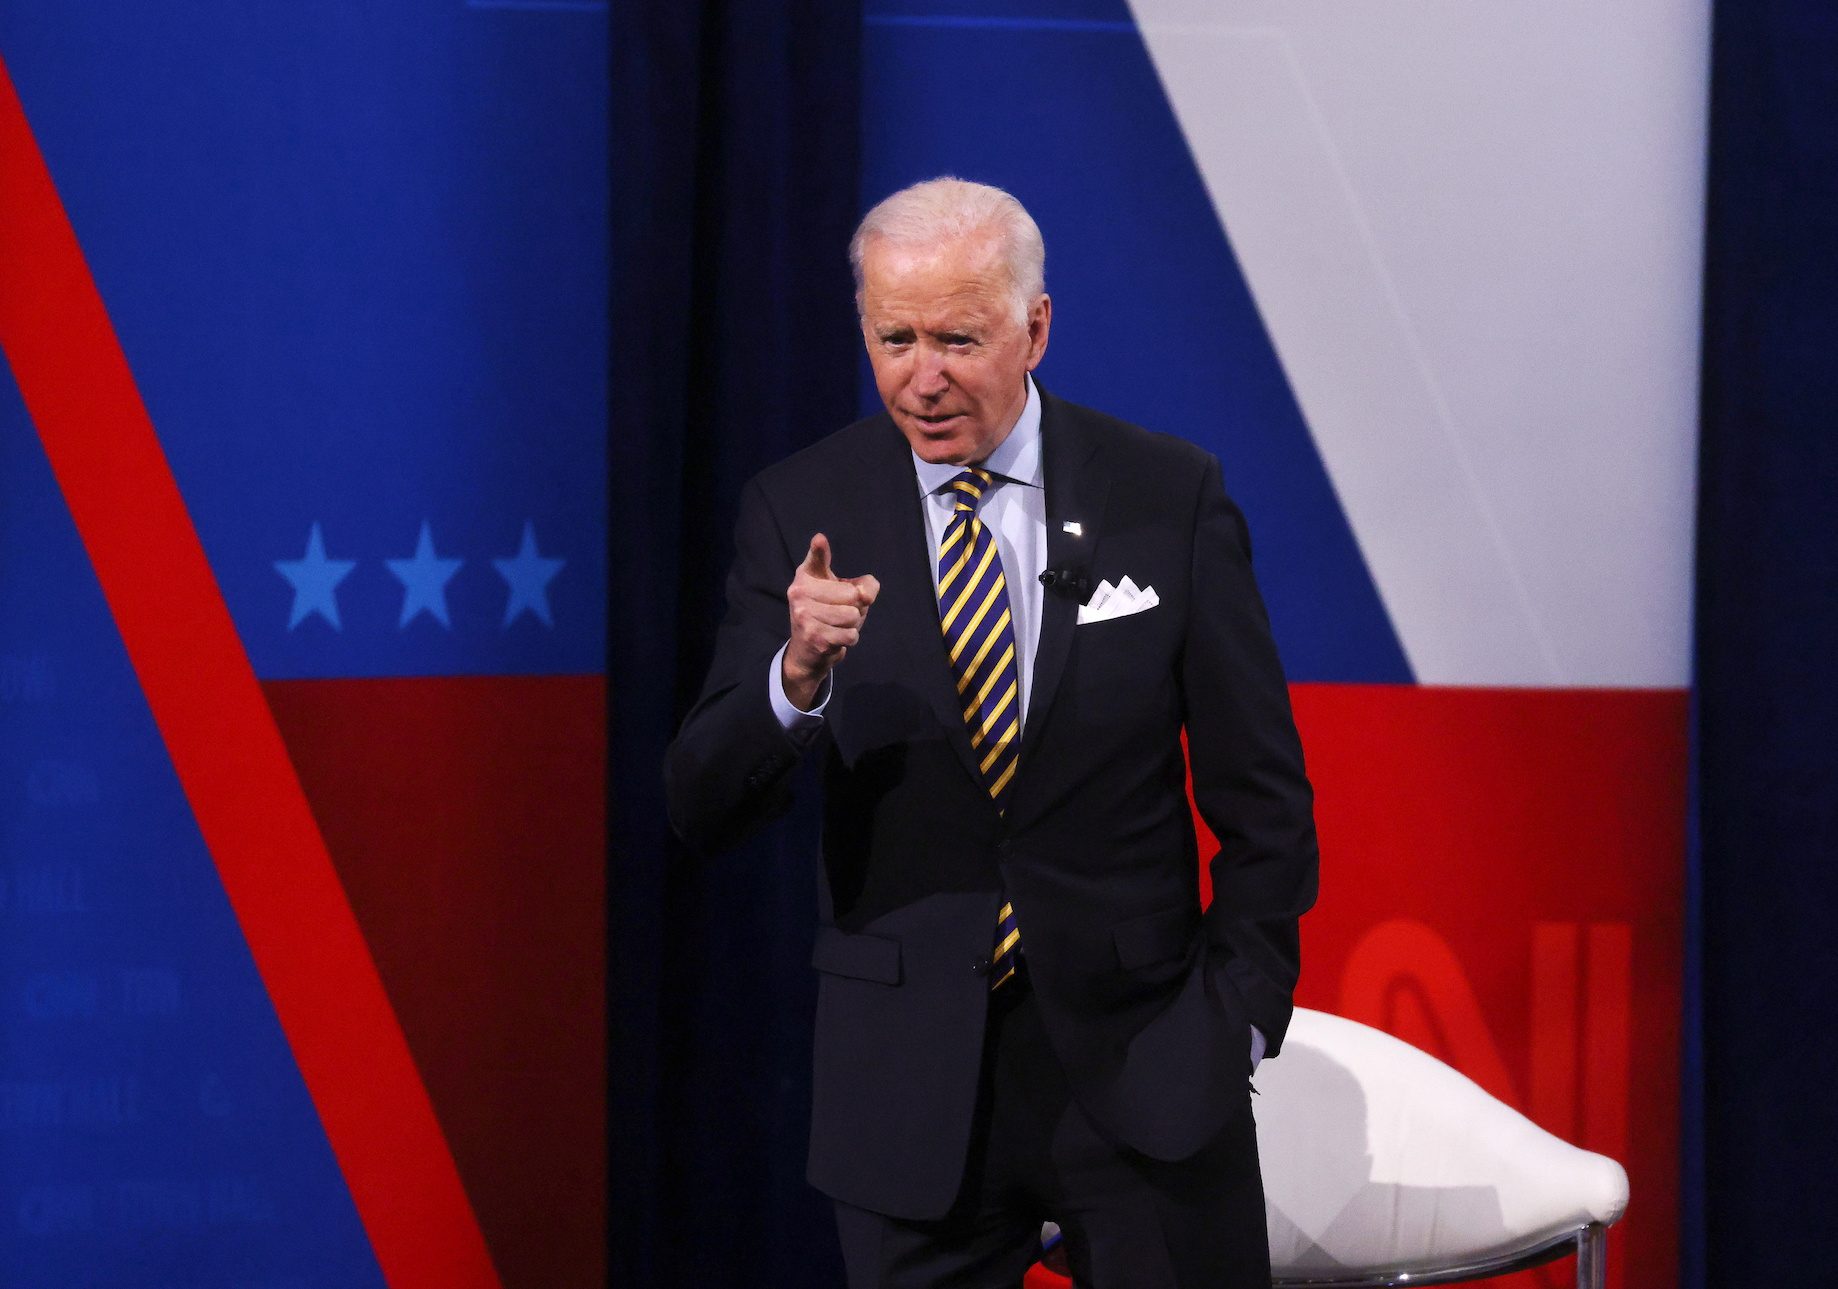 Biden suggests more police funding, no jail for drug offenders